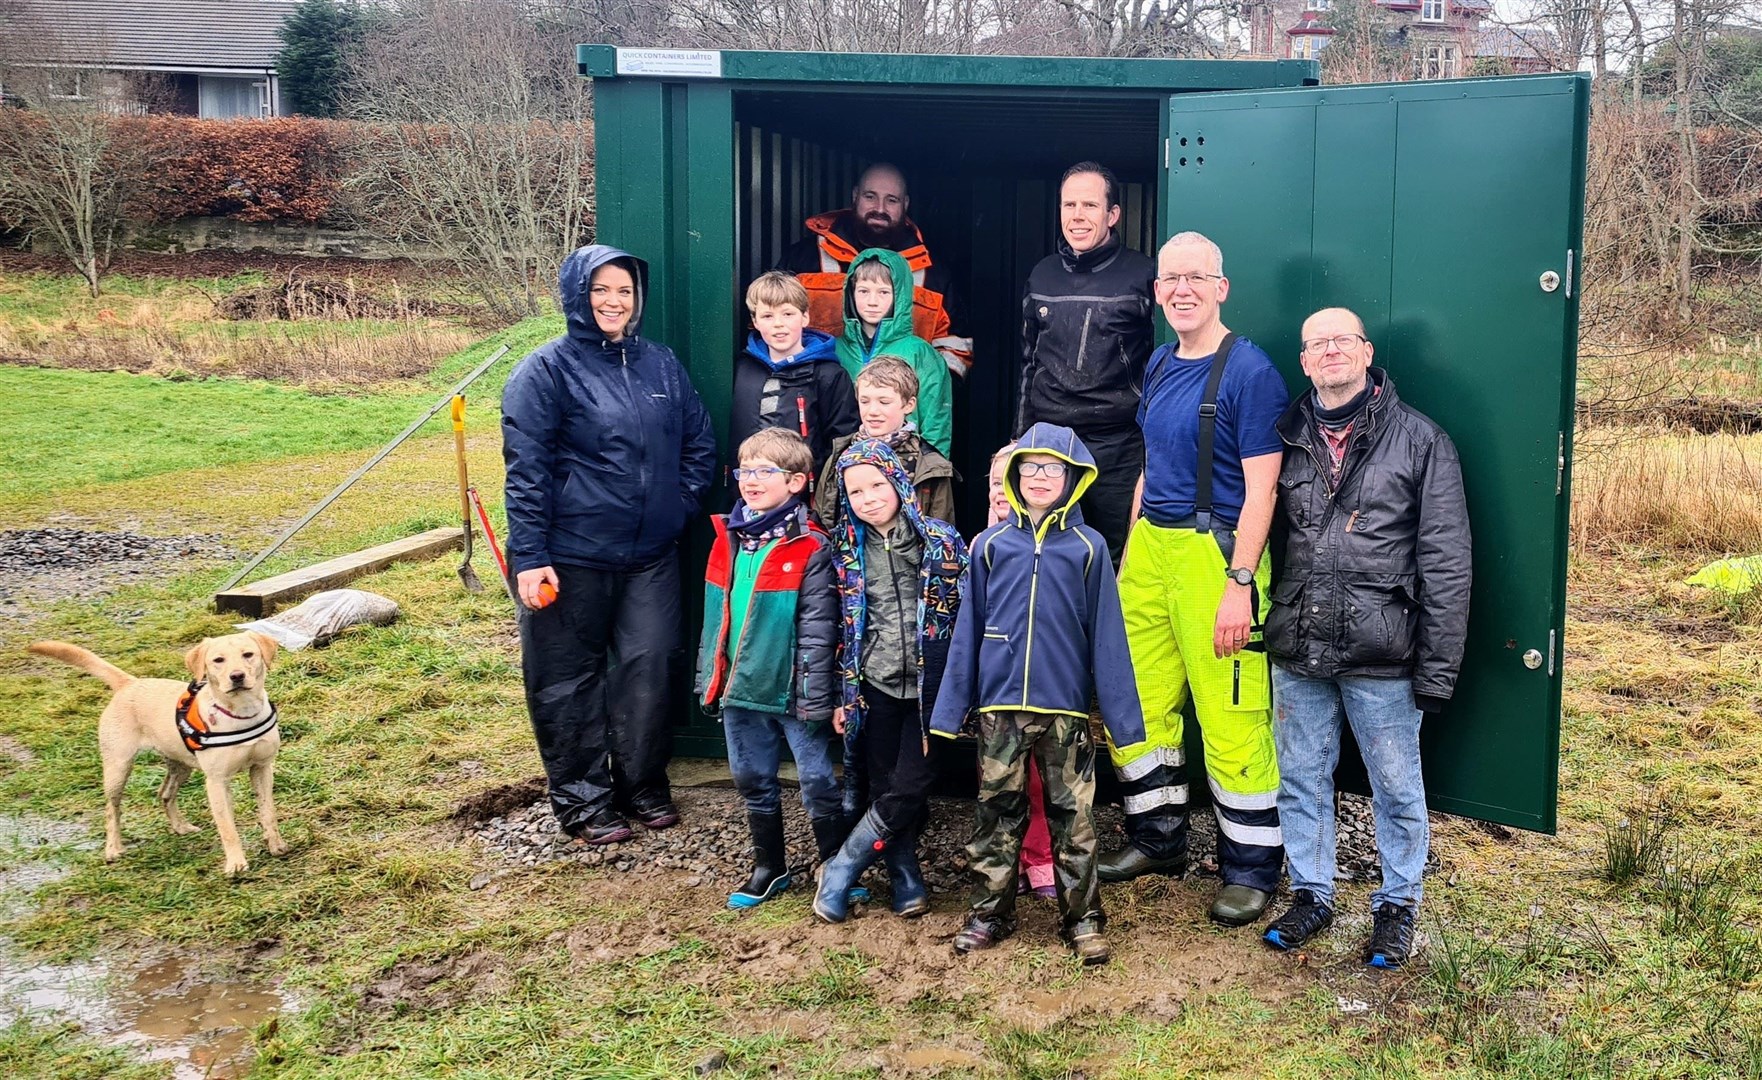 Community volunteers have been working hard behind the scenes to pave the way for a new playpark and outdoor community hub in the village of Strathpeffer.